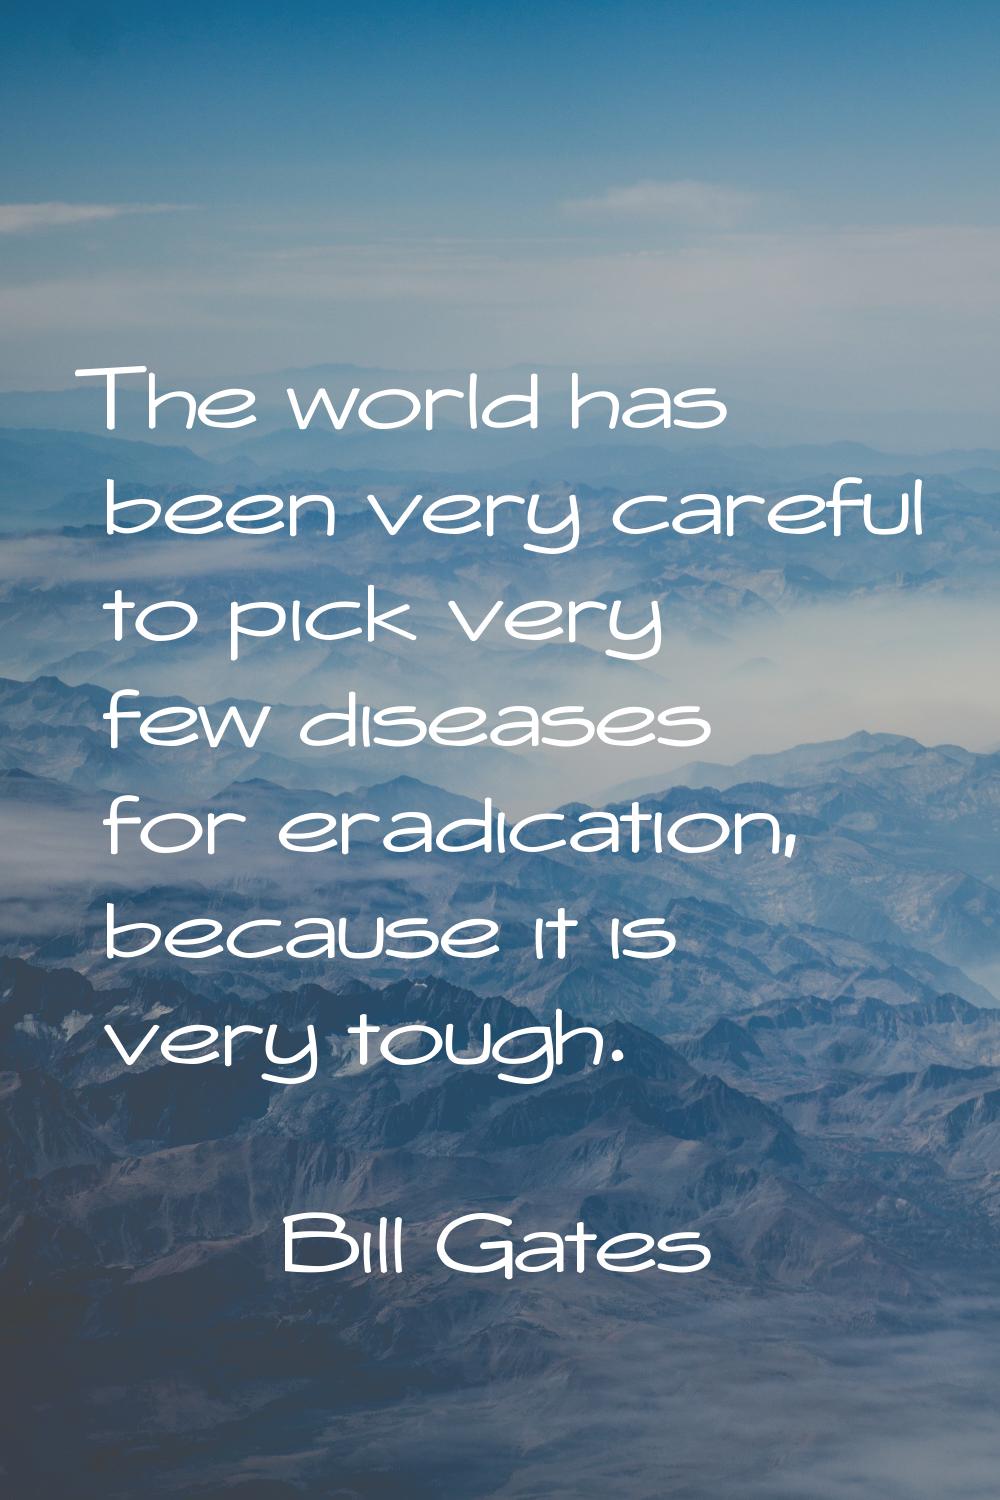 The world has been very careful to pick very few diseases for eradication, because it is very tough